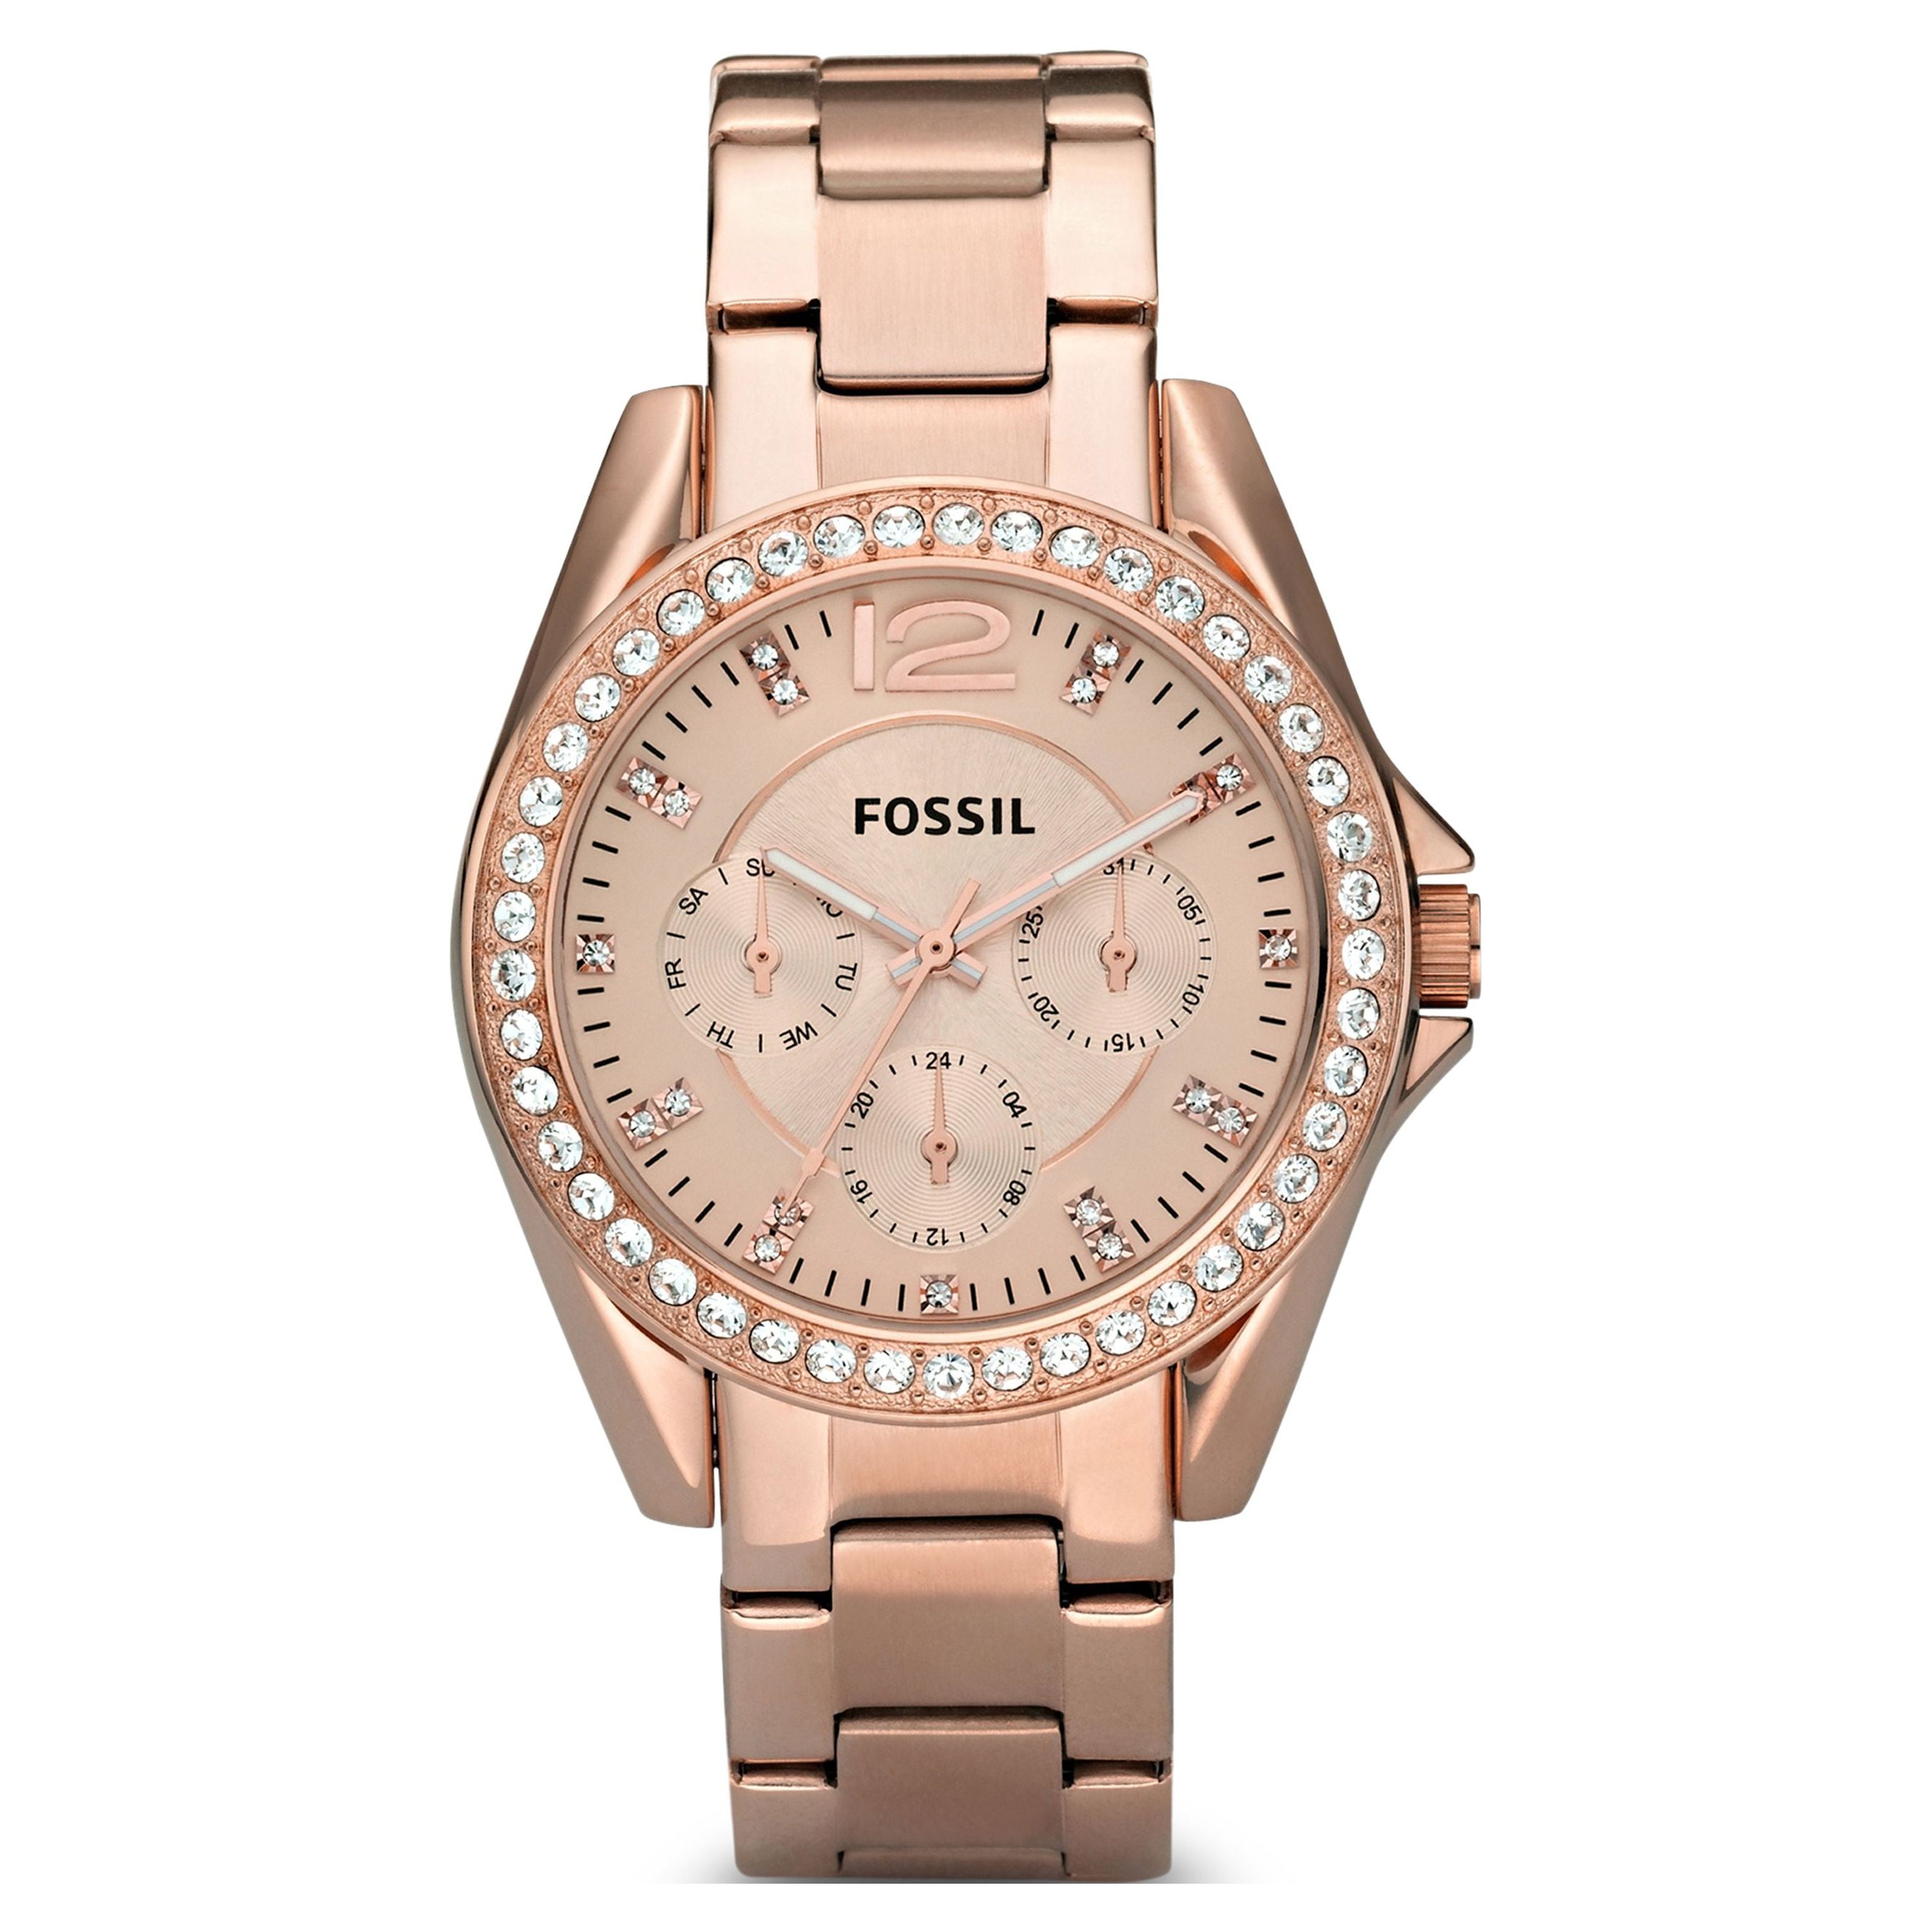 Fossil Women's Riley Multifunction, Rose Gold-Tone Stainless Steel Watch, ES2811 - image 1 of 4